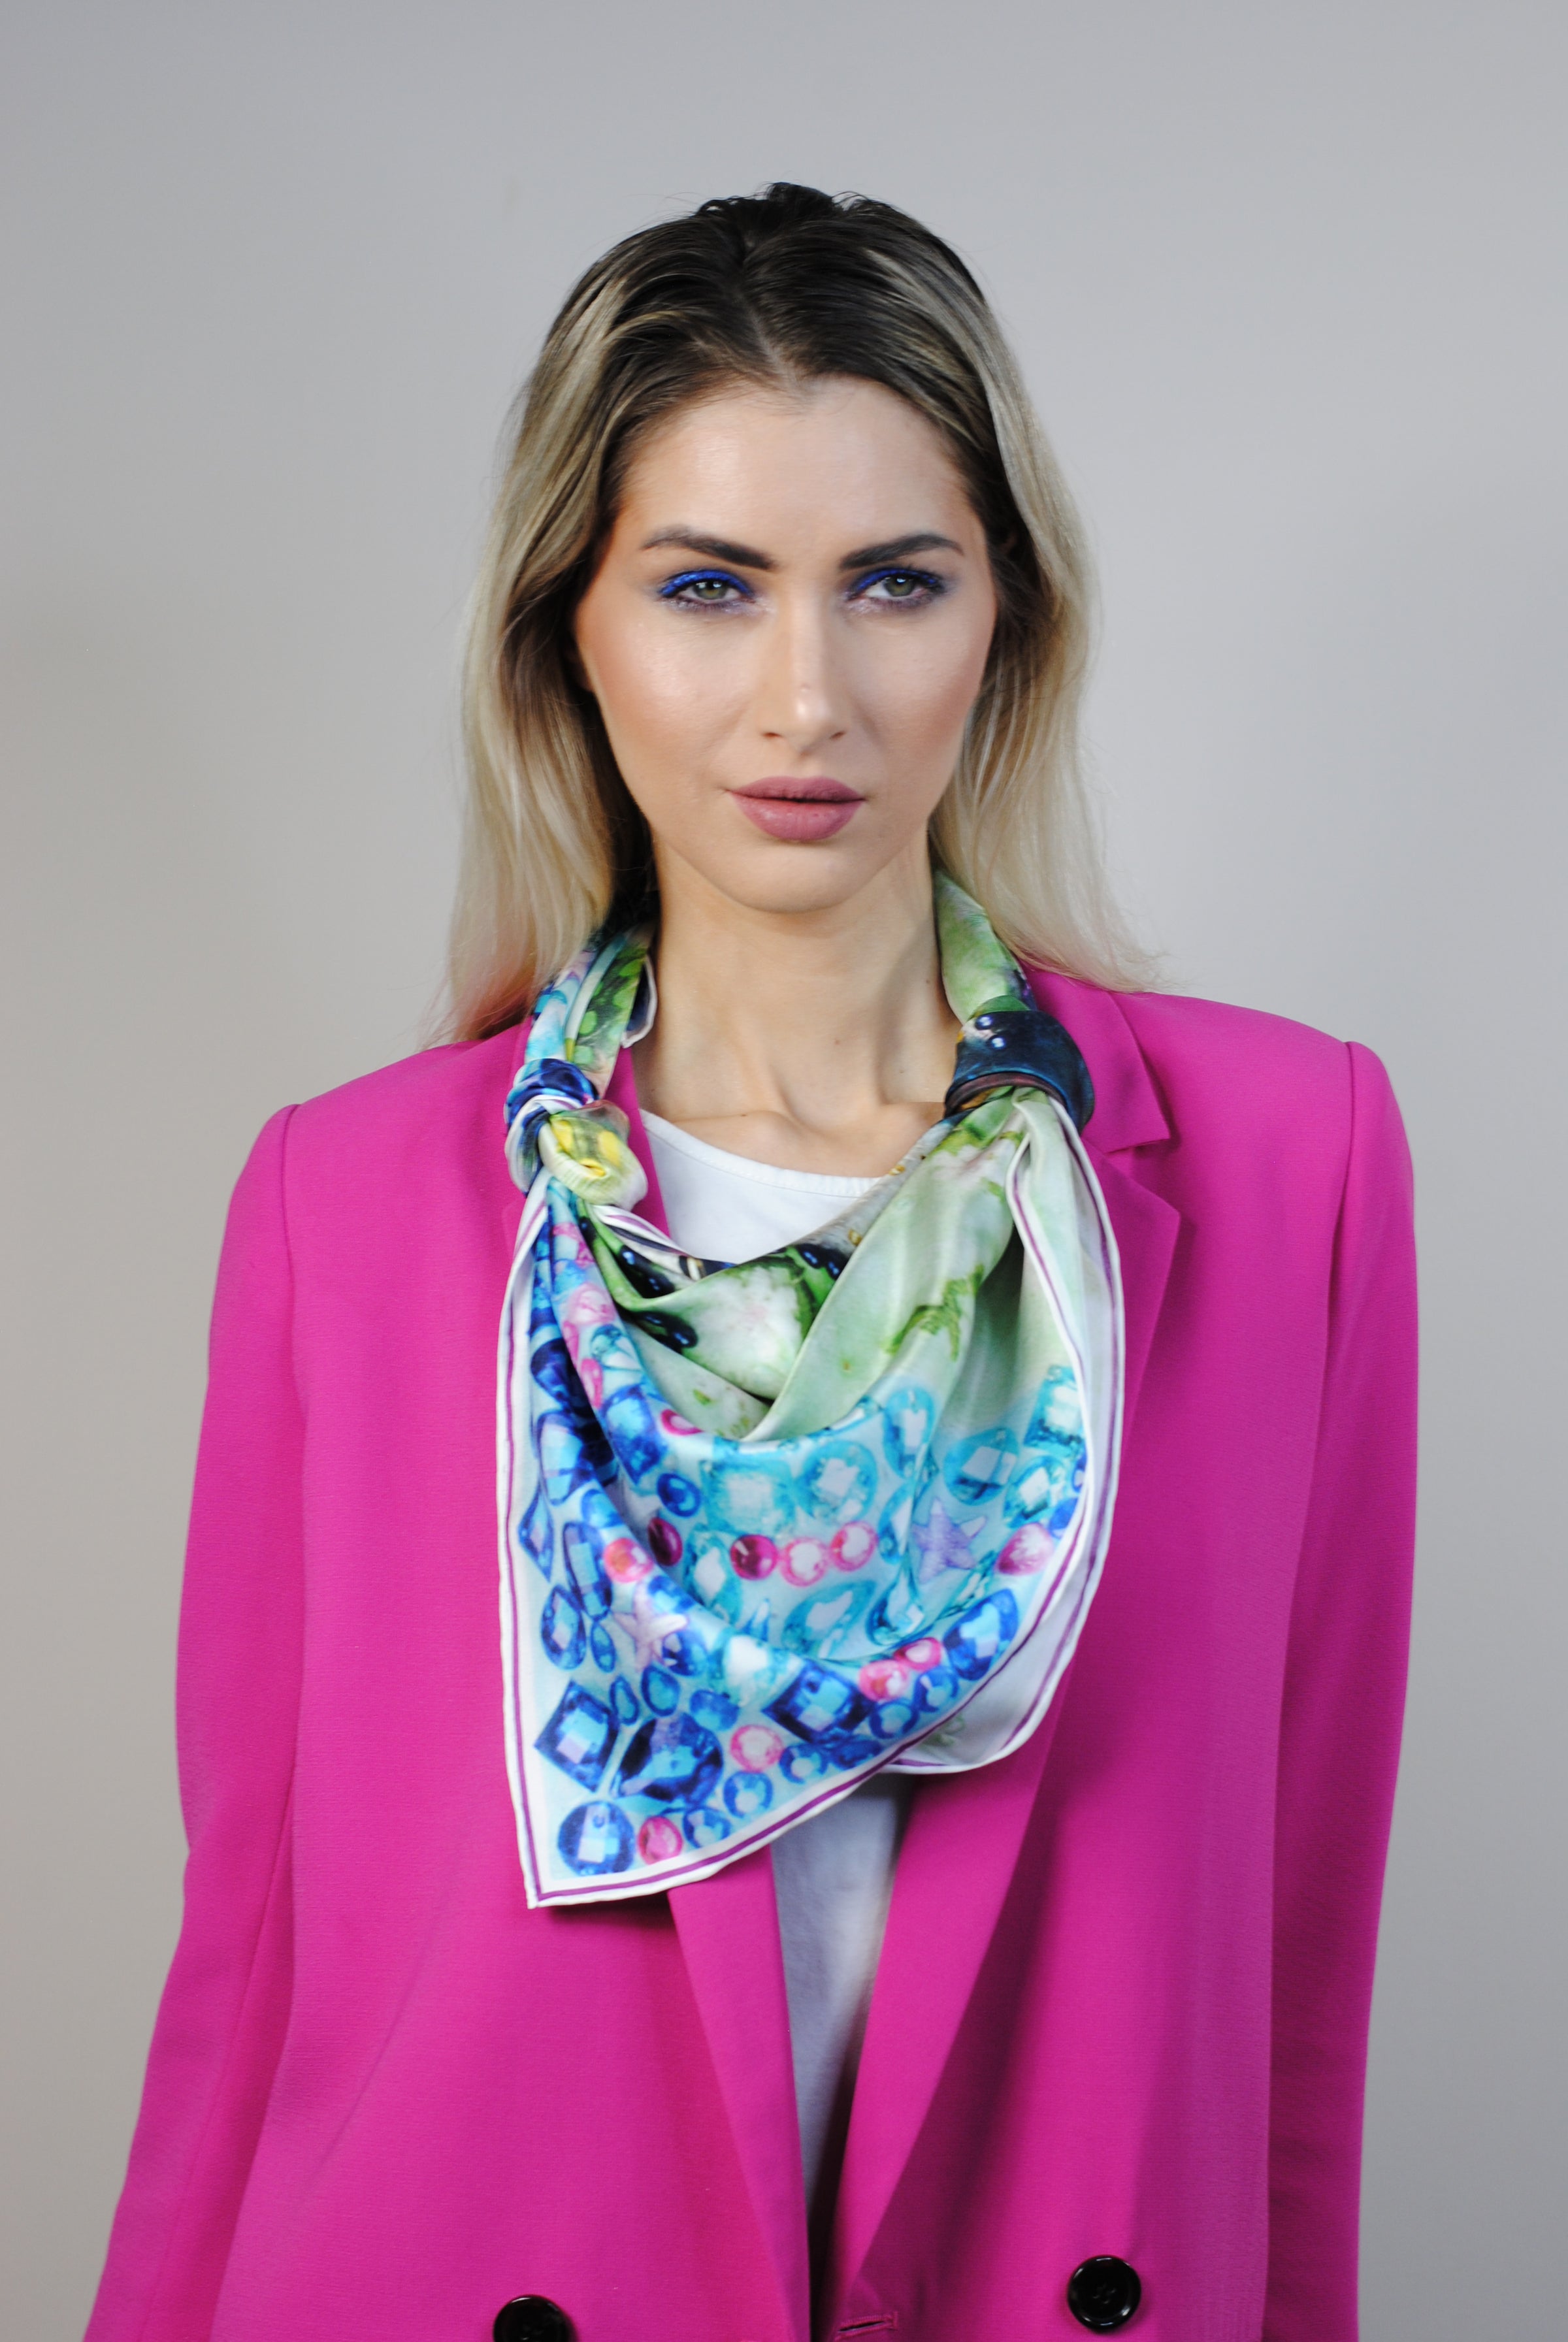 Alesia Chaika Art Inspired Designer Silk Scarves and Accessories